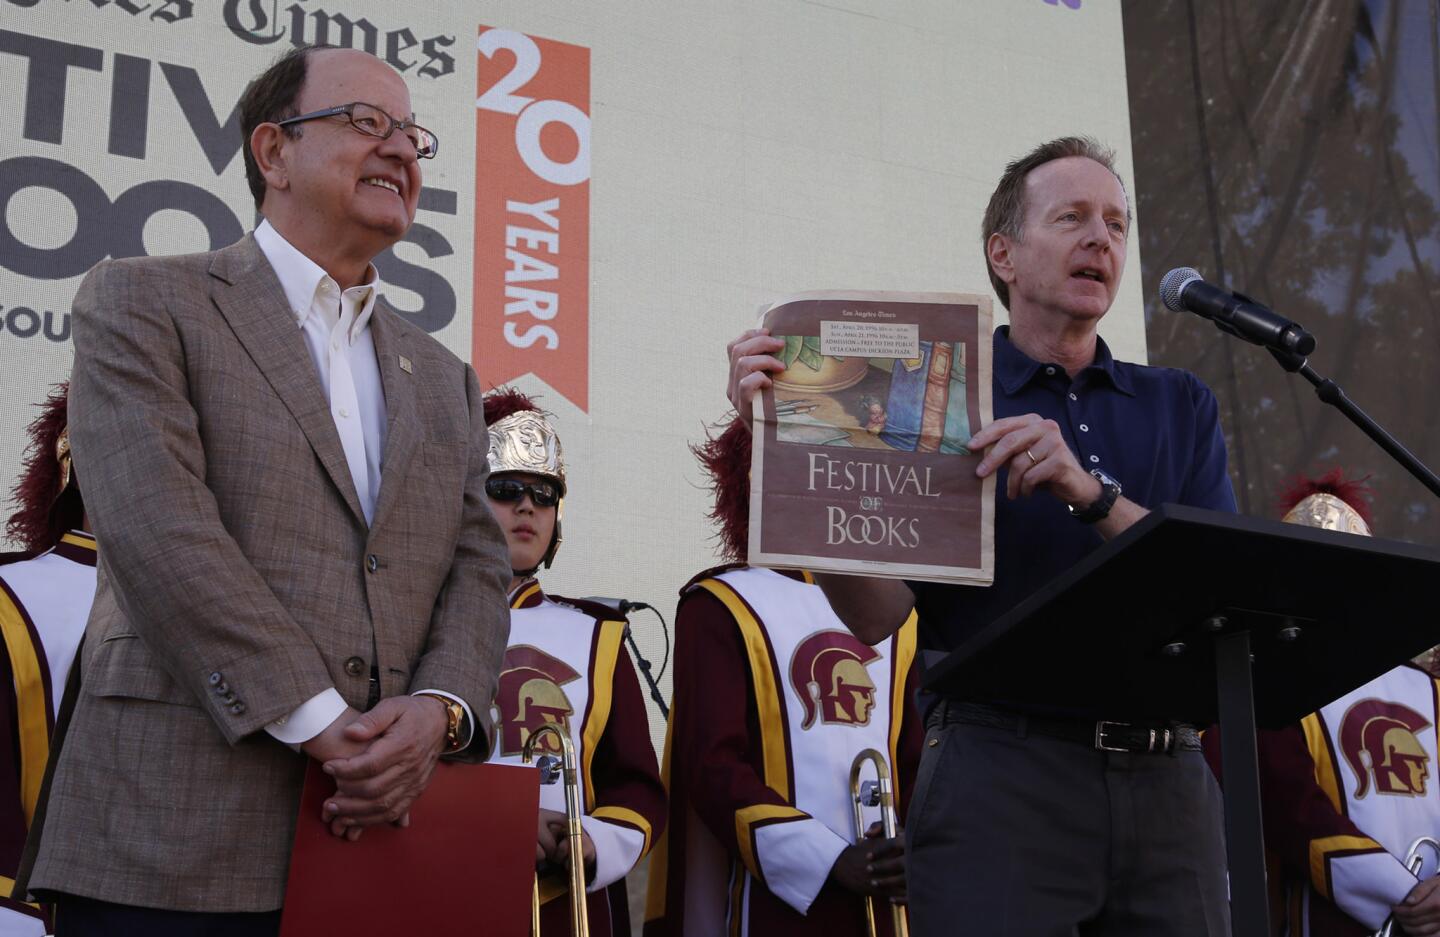 Los Angeles Times Publisher Austin Beutner, right, is joined by USC President C.L. Max Nikias for the official kickoff of the Los Angeles Times Festival of Books on Saturday morning.